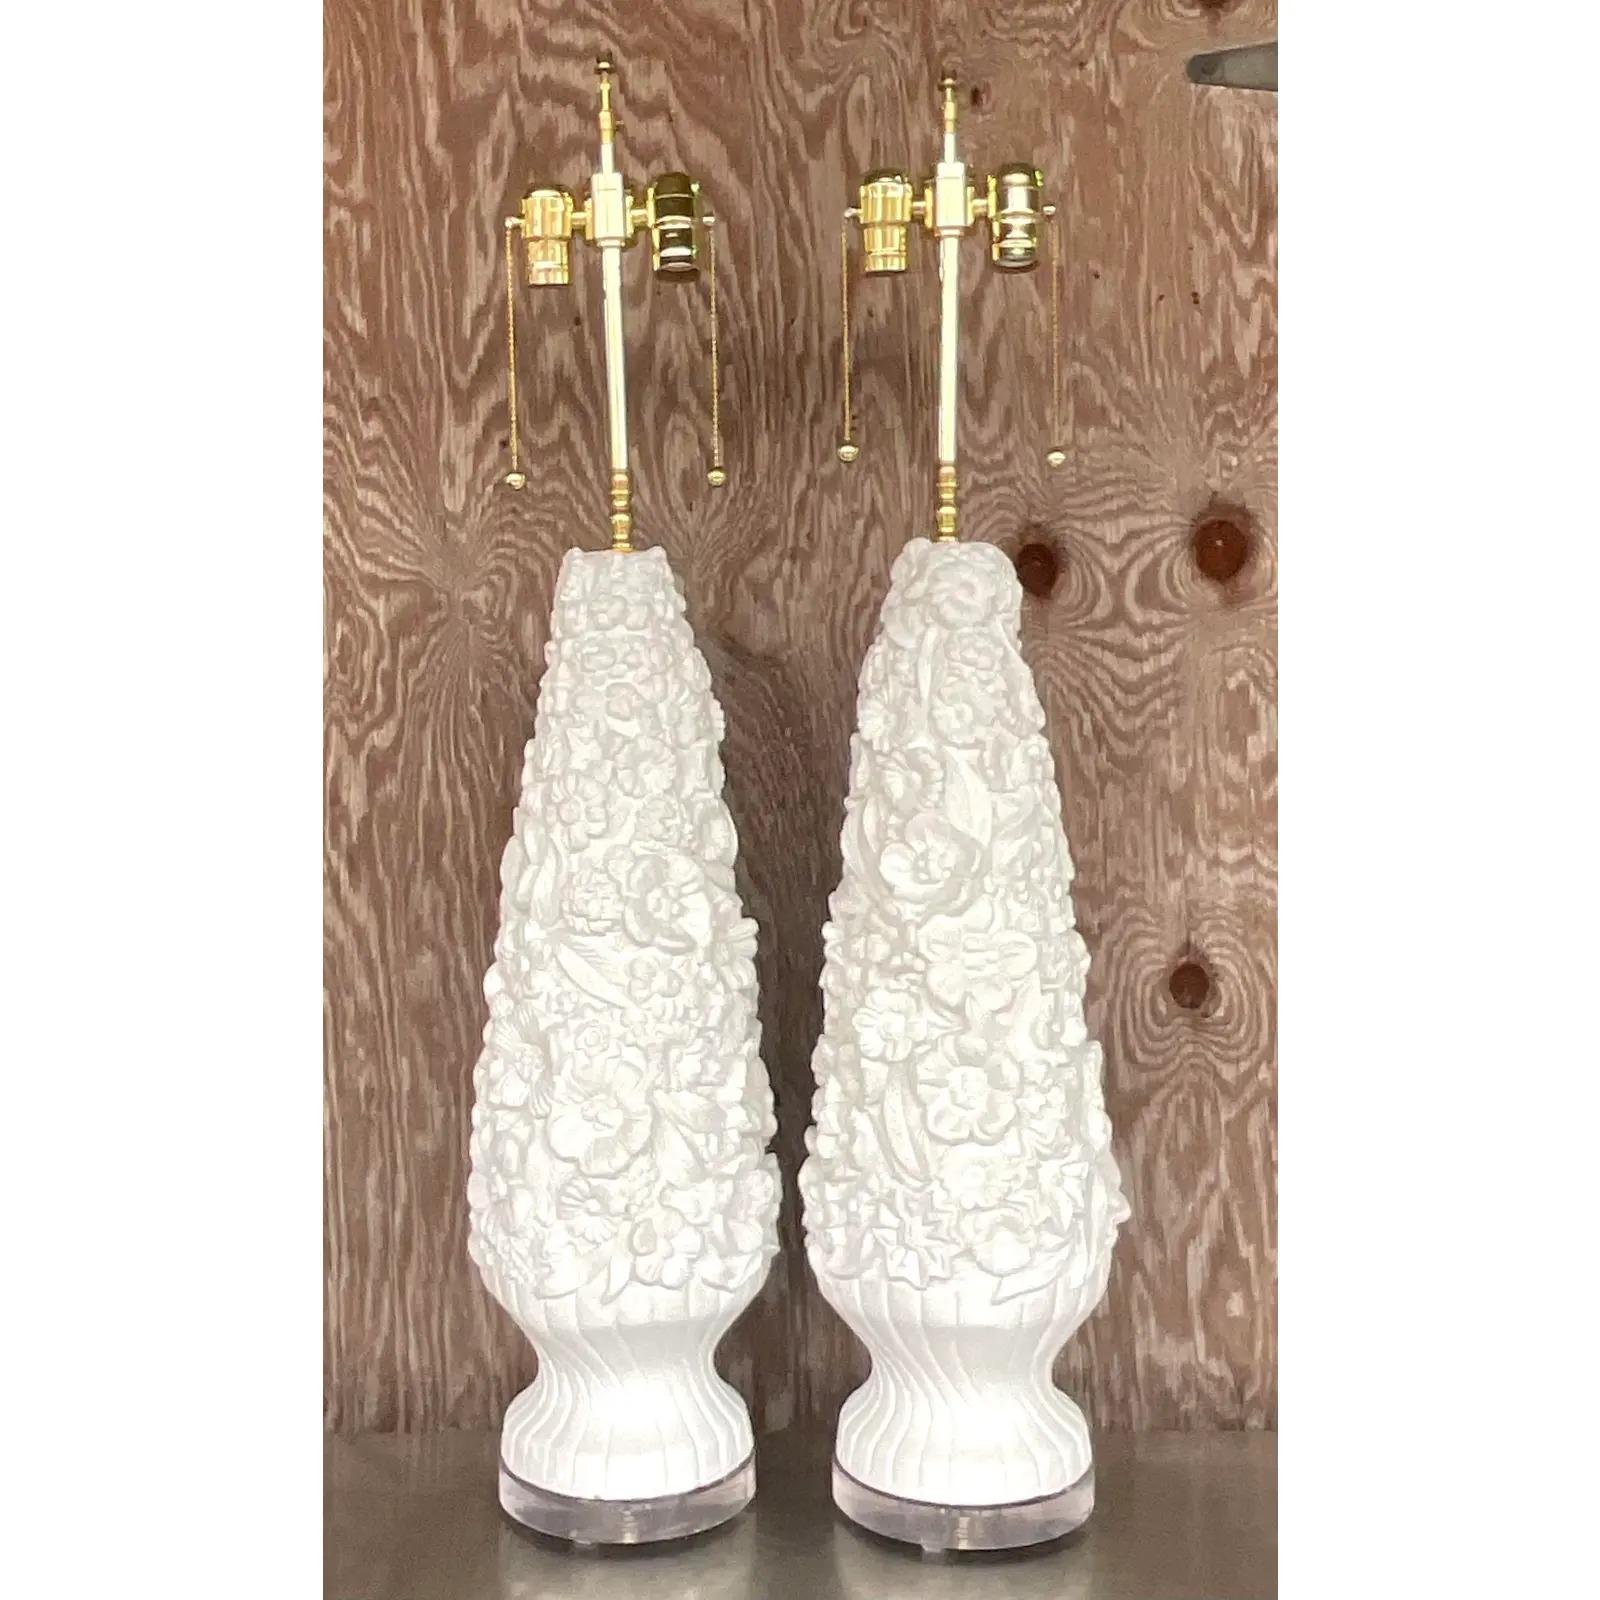 20th Century Vintage Coastal Monumental Plaster Floral Table Lamps - a Pair For Sale